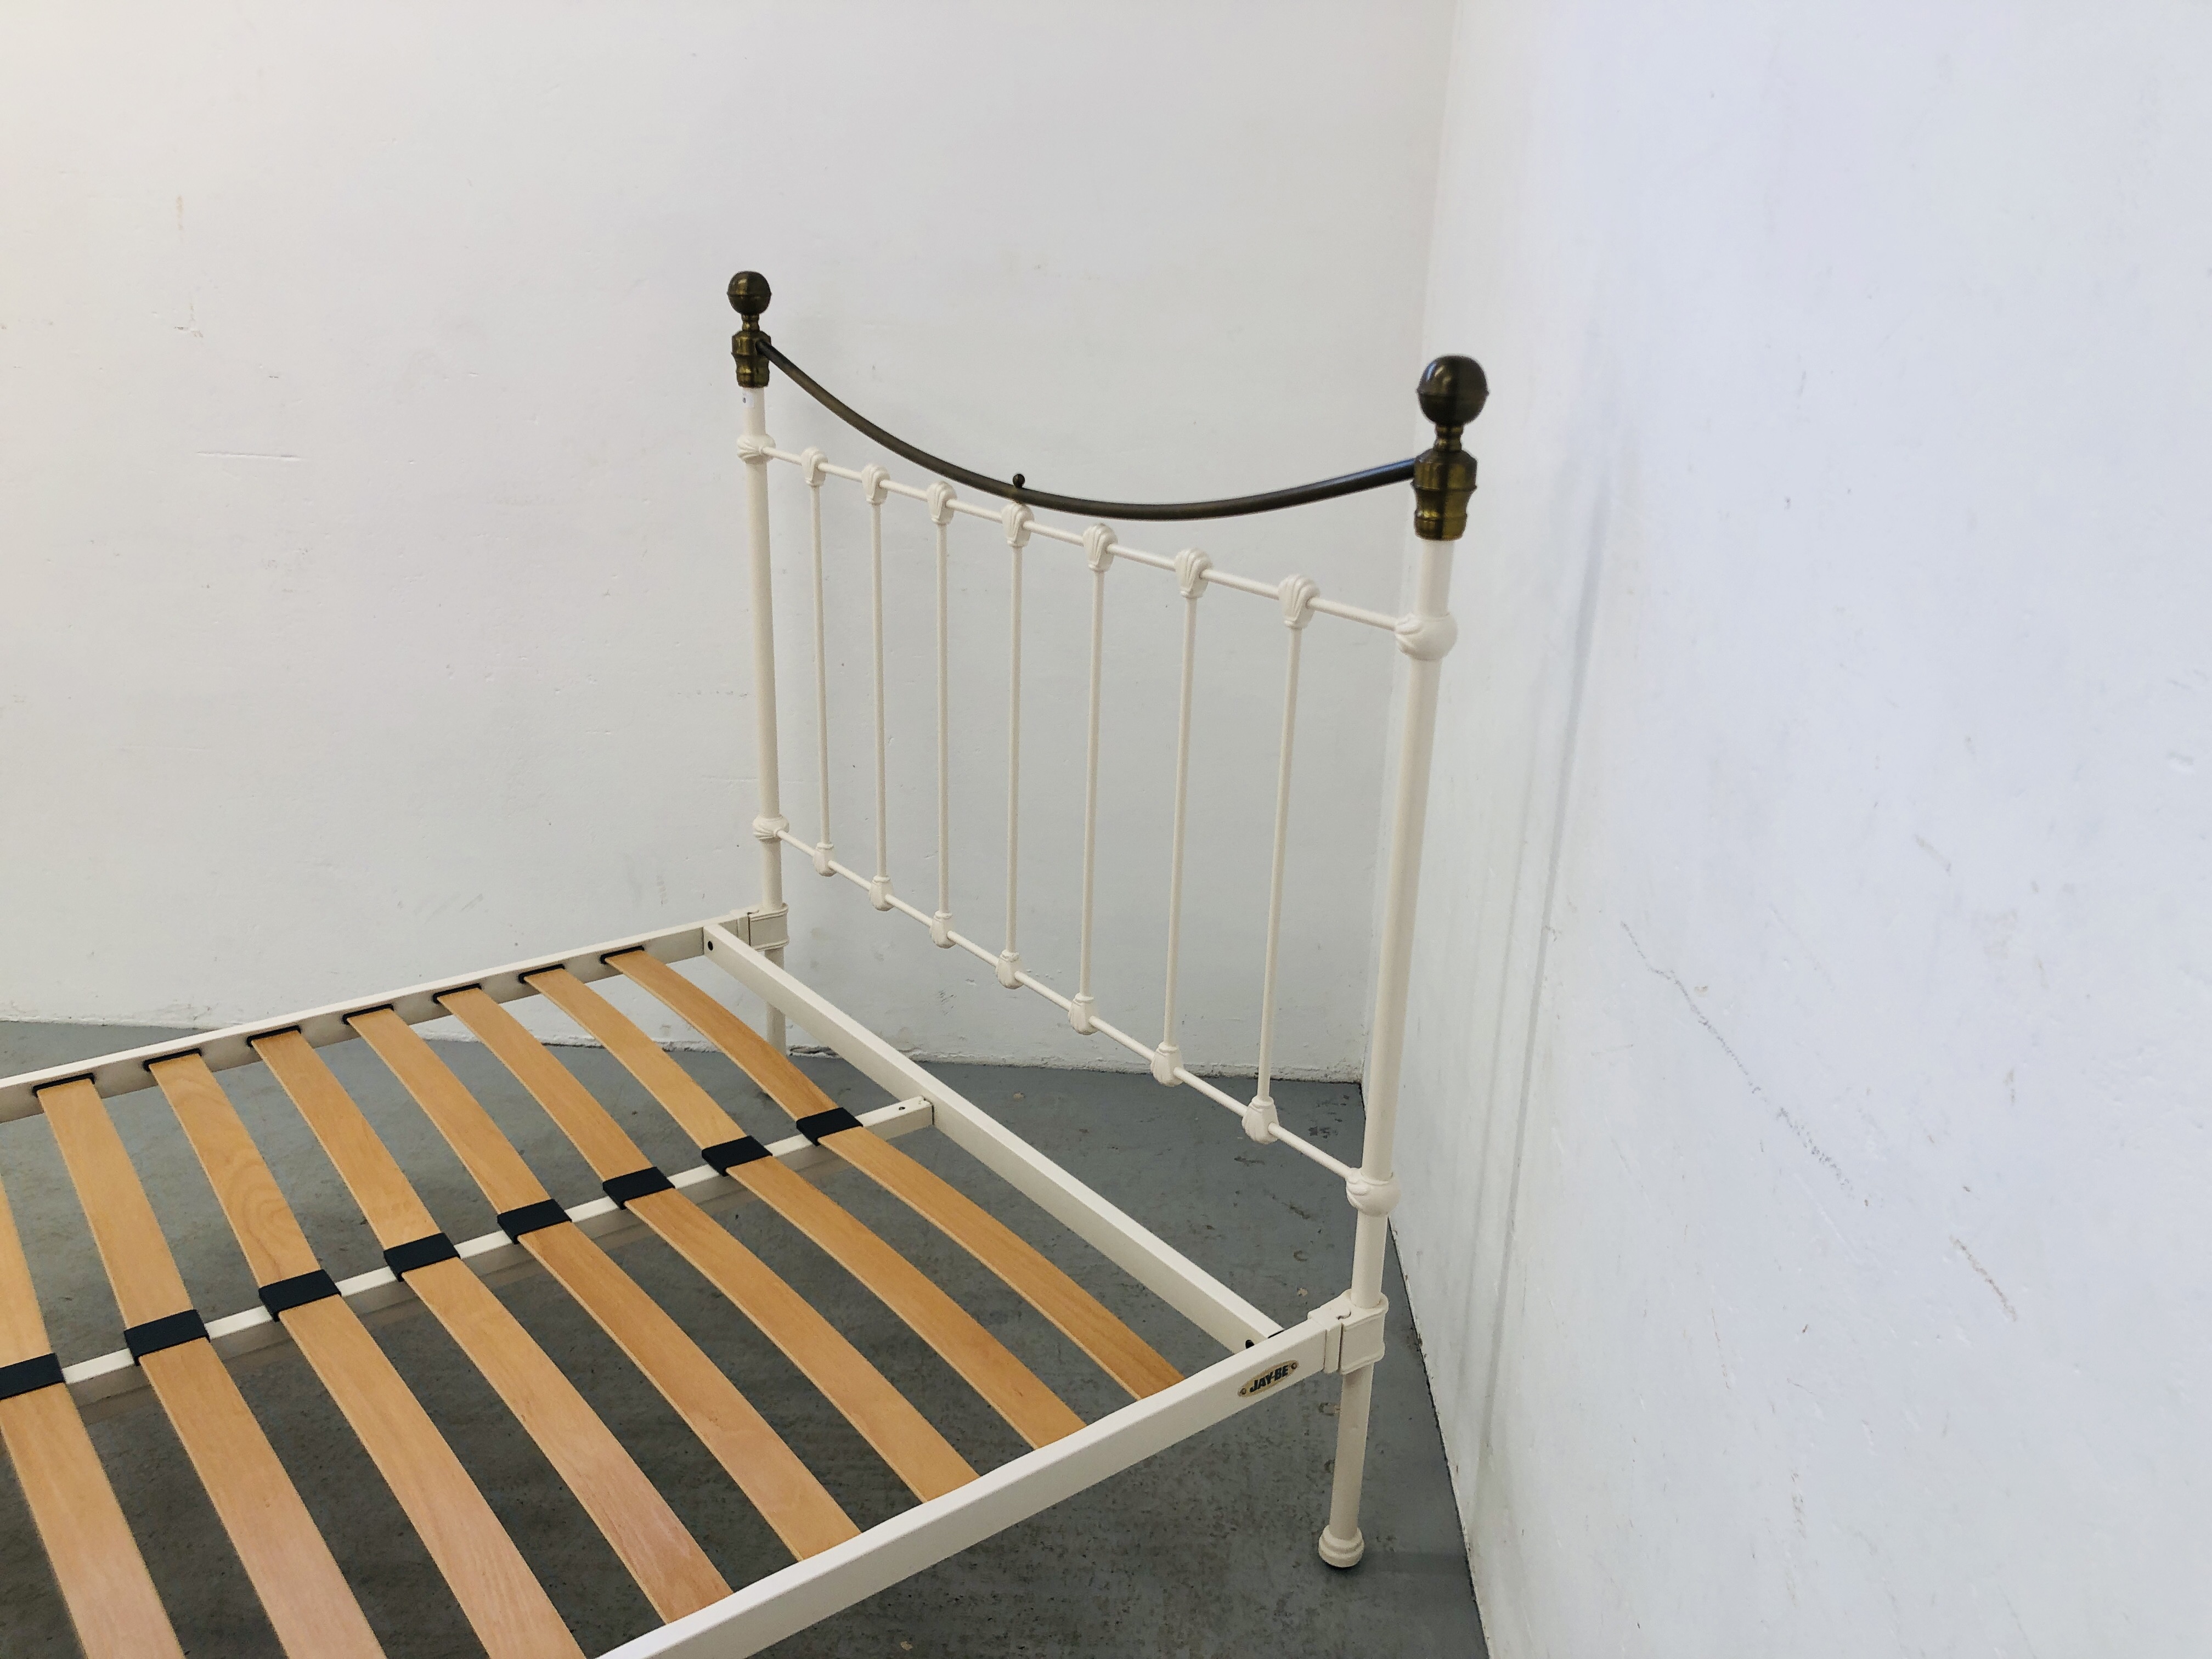 A MODERN VICTORIAN STYLE METAL FRAMED DOUBLE BED FRAME WITH BRASS FINIAL FINISH - Image 5 of 7